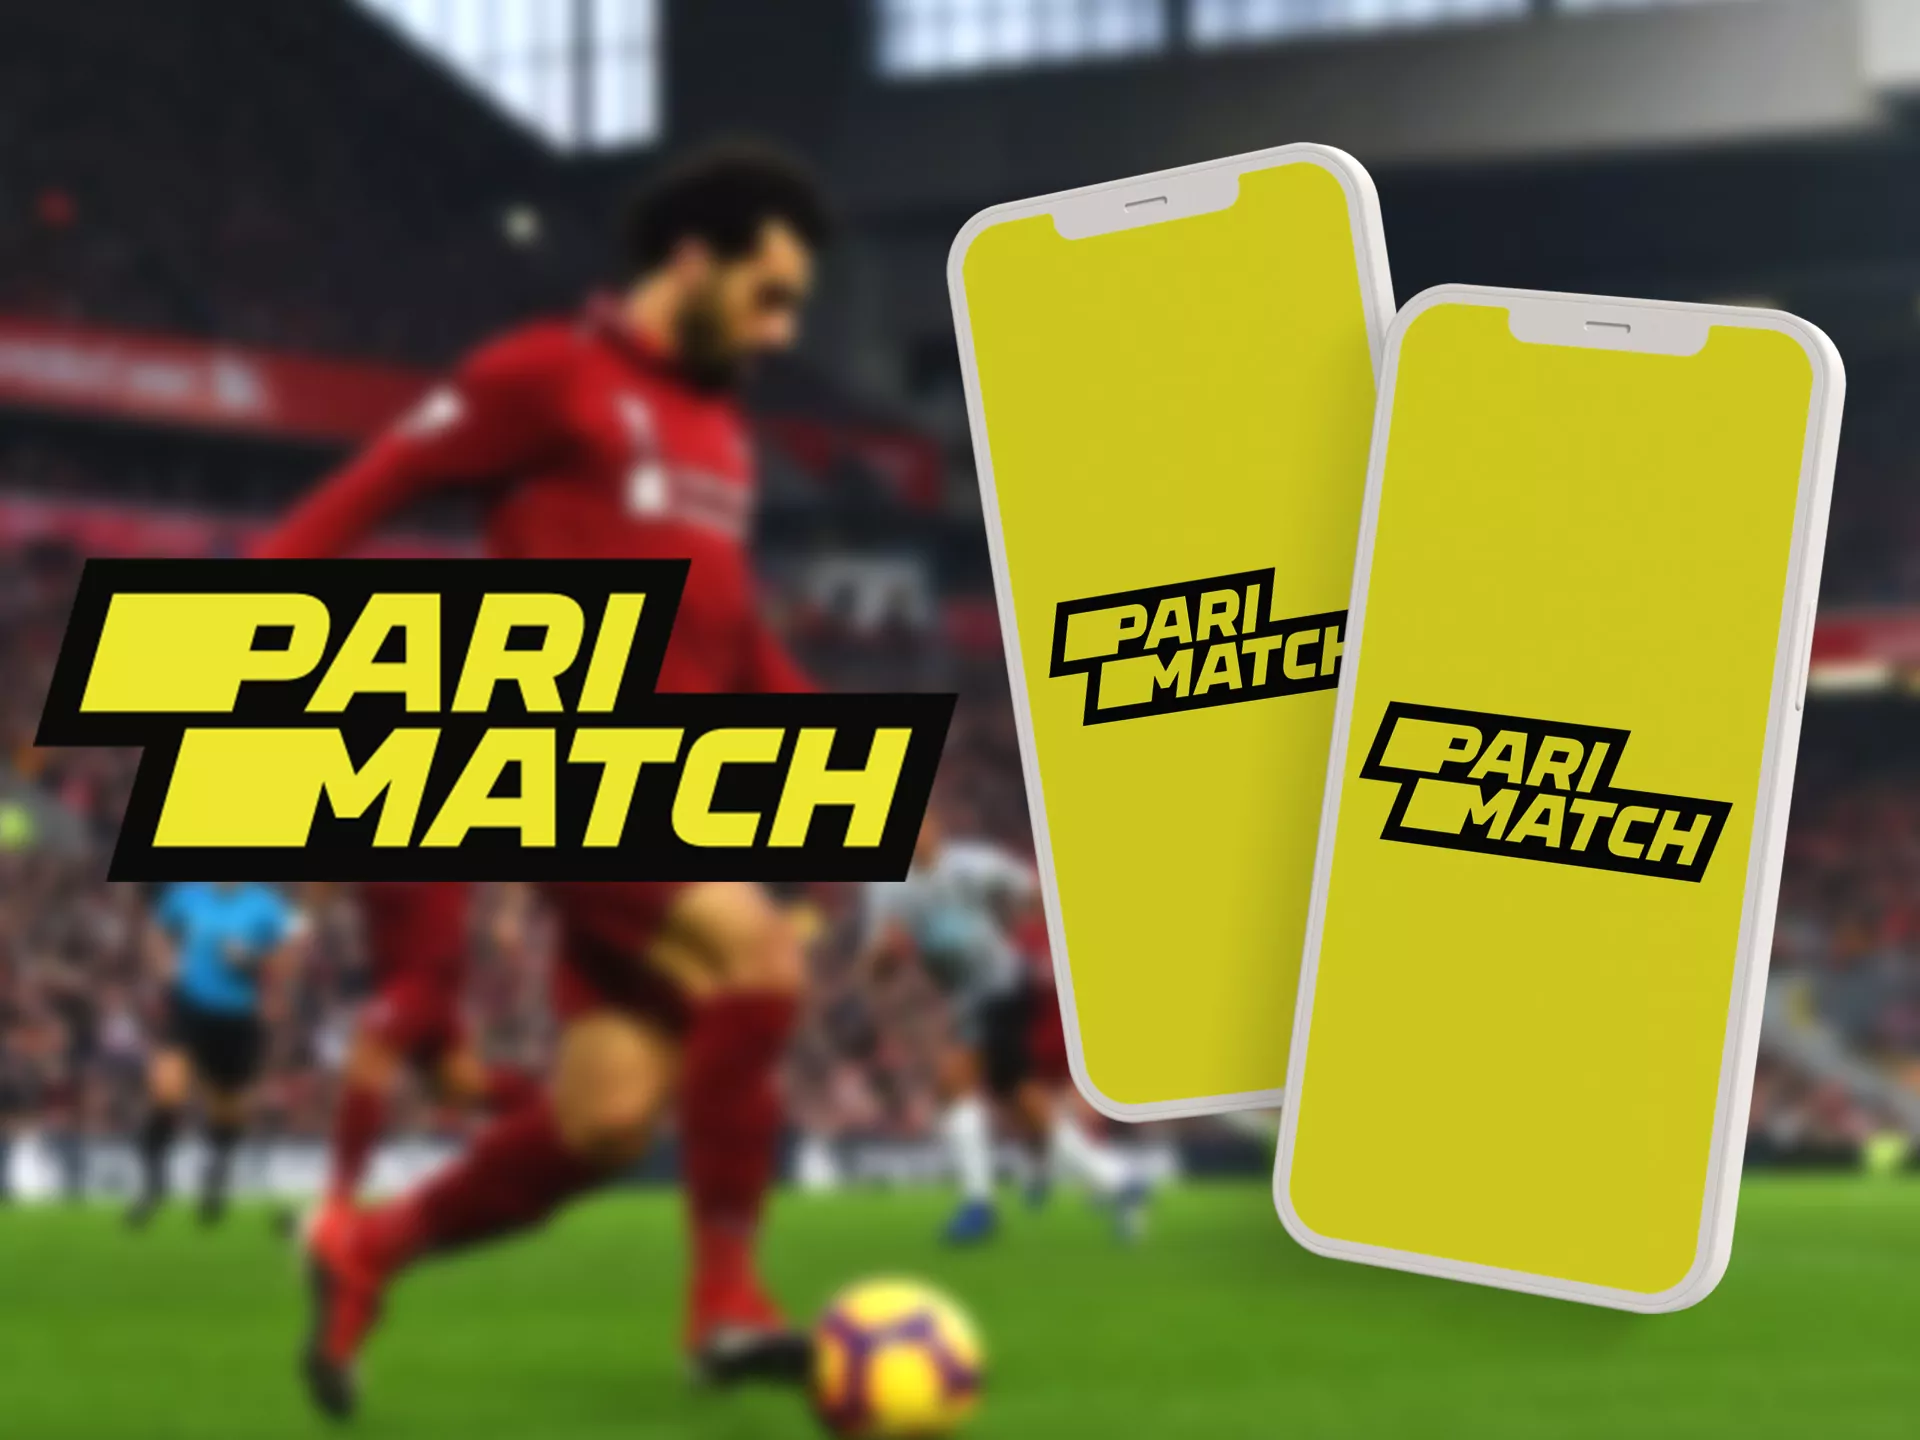 PariMatch is a best soccer betting company.